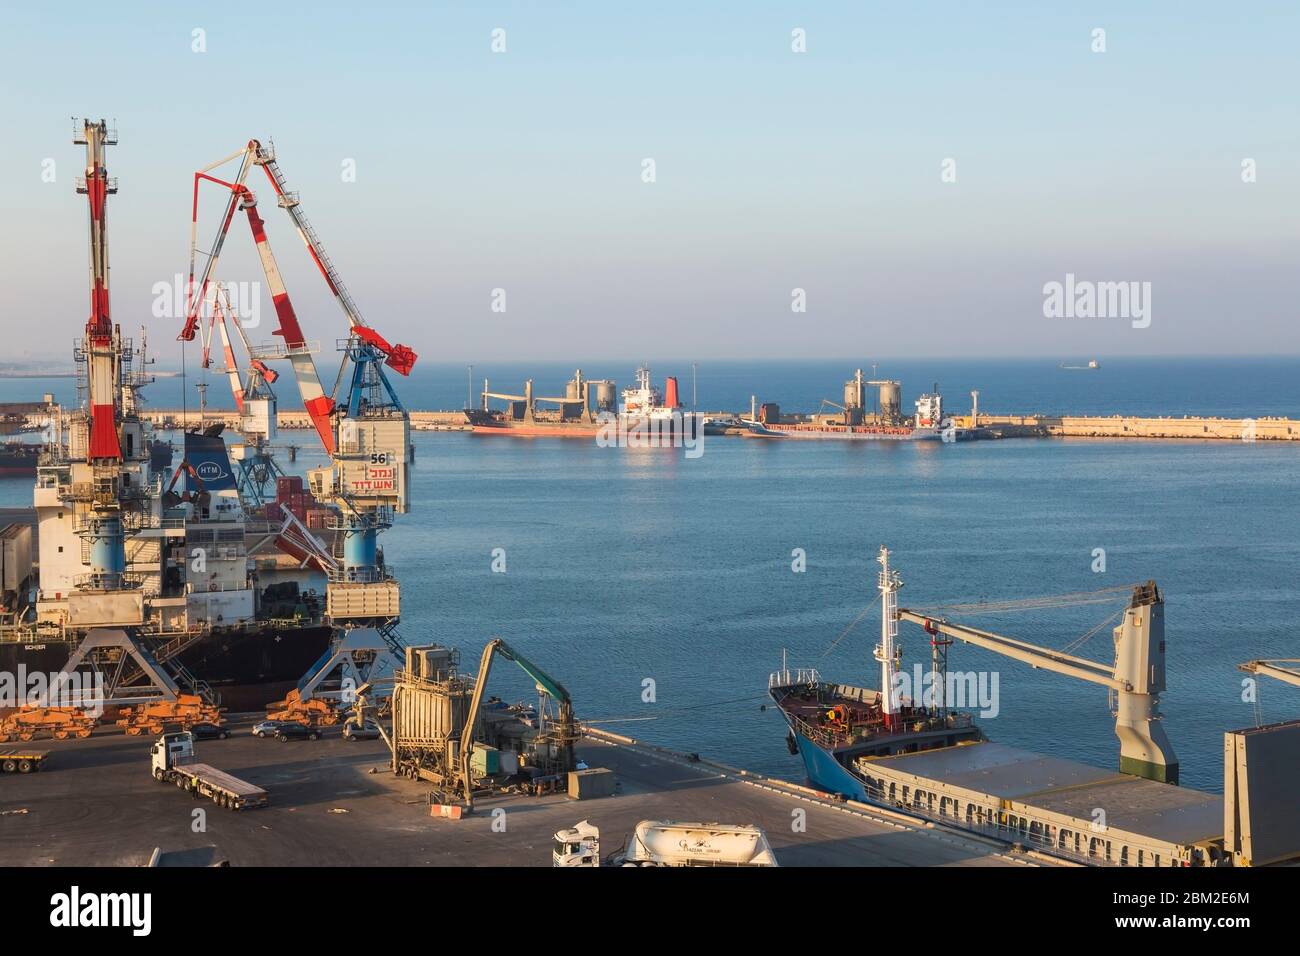 Four-link cargo loading cranes on dock and docked cargo ships in Ashdod Port, Israel Stock Photo